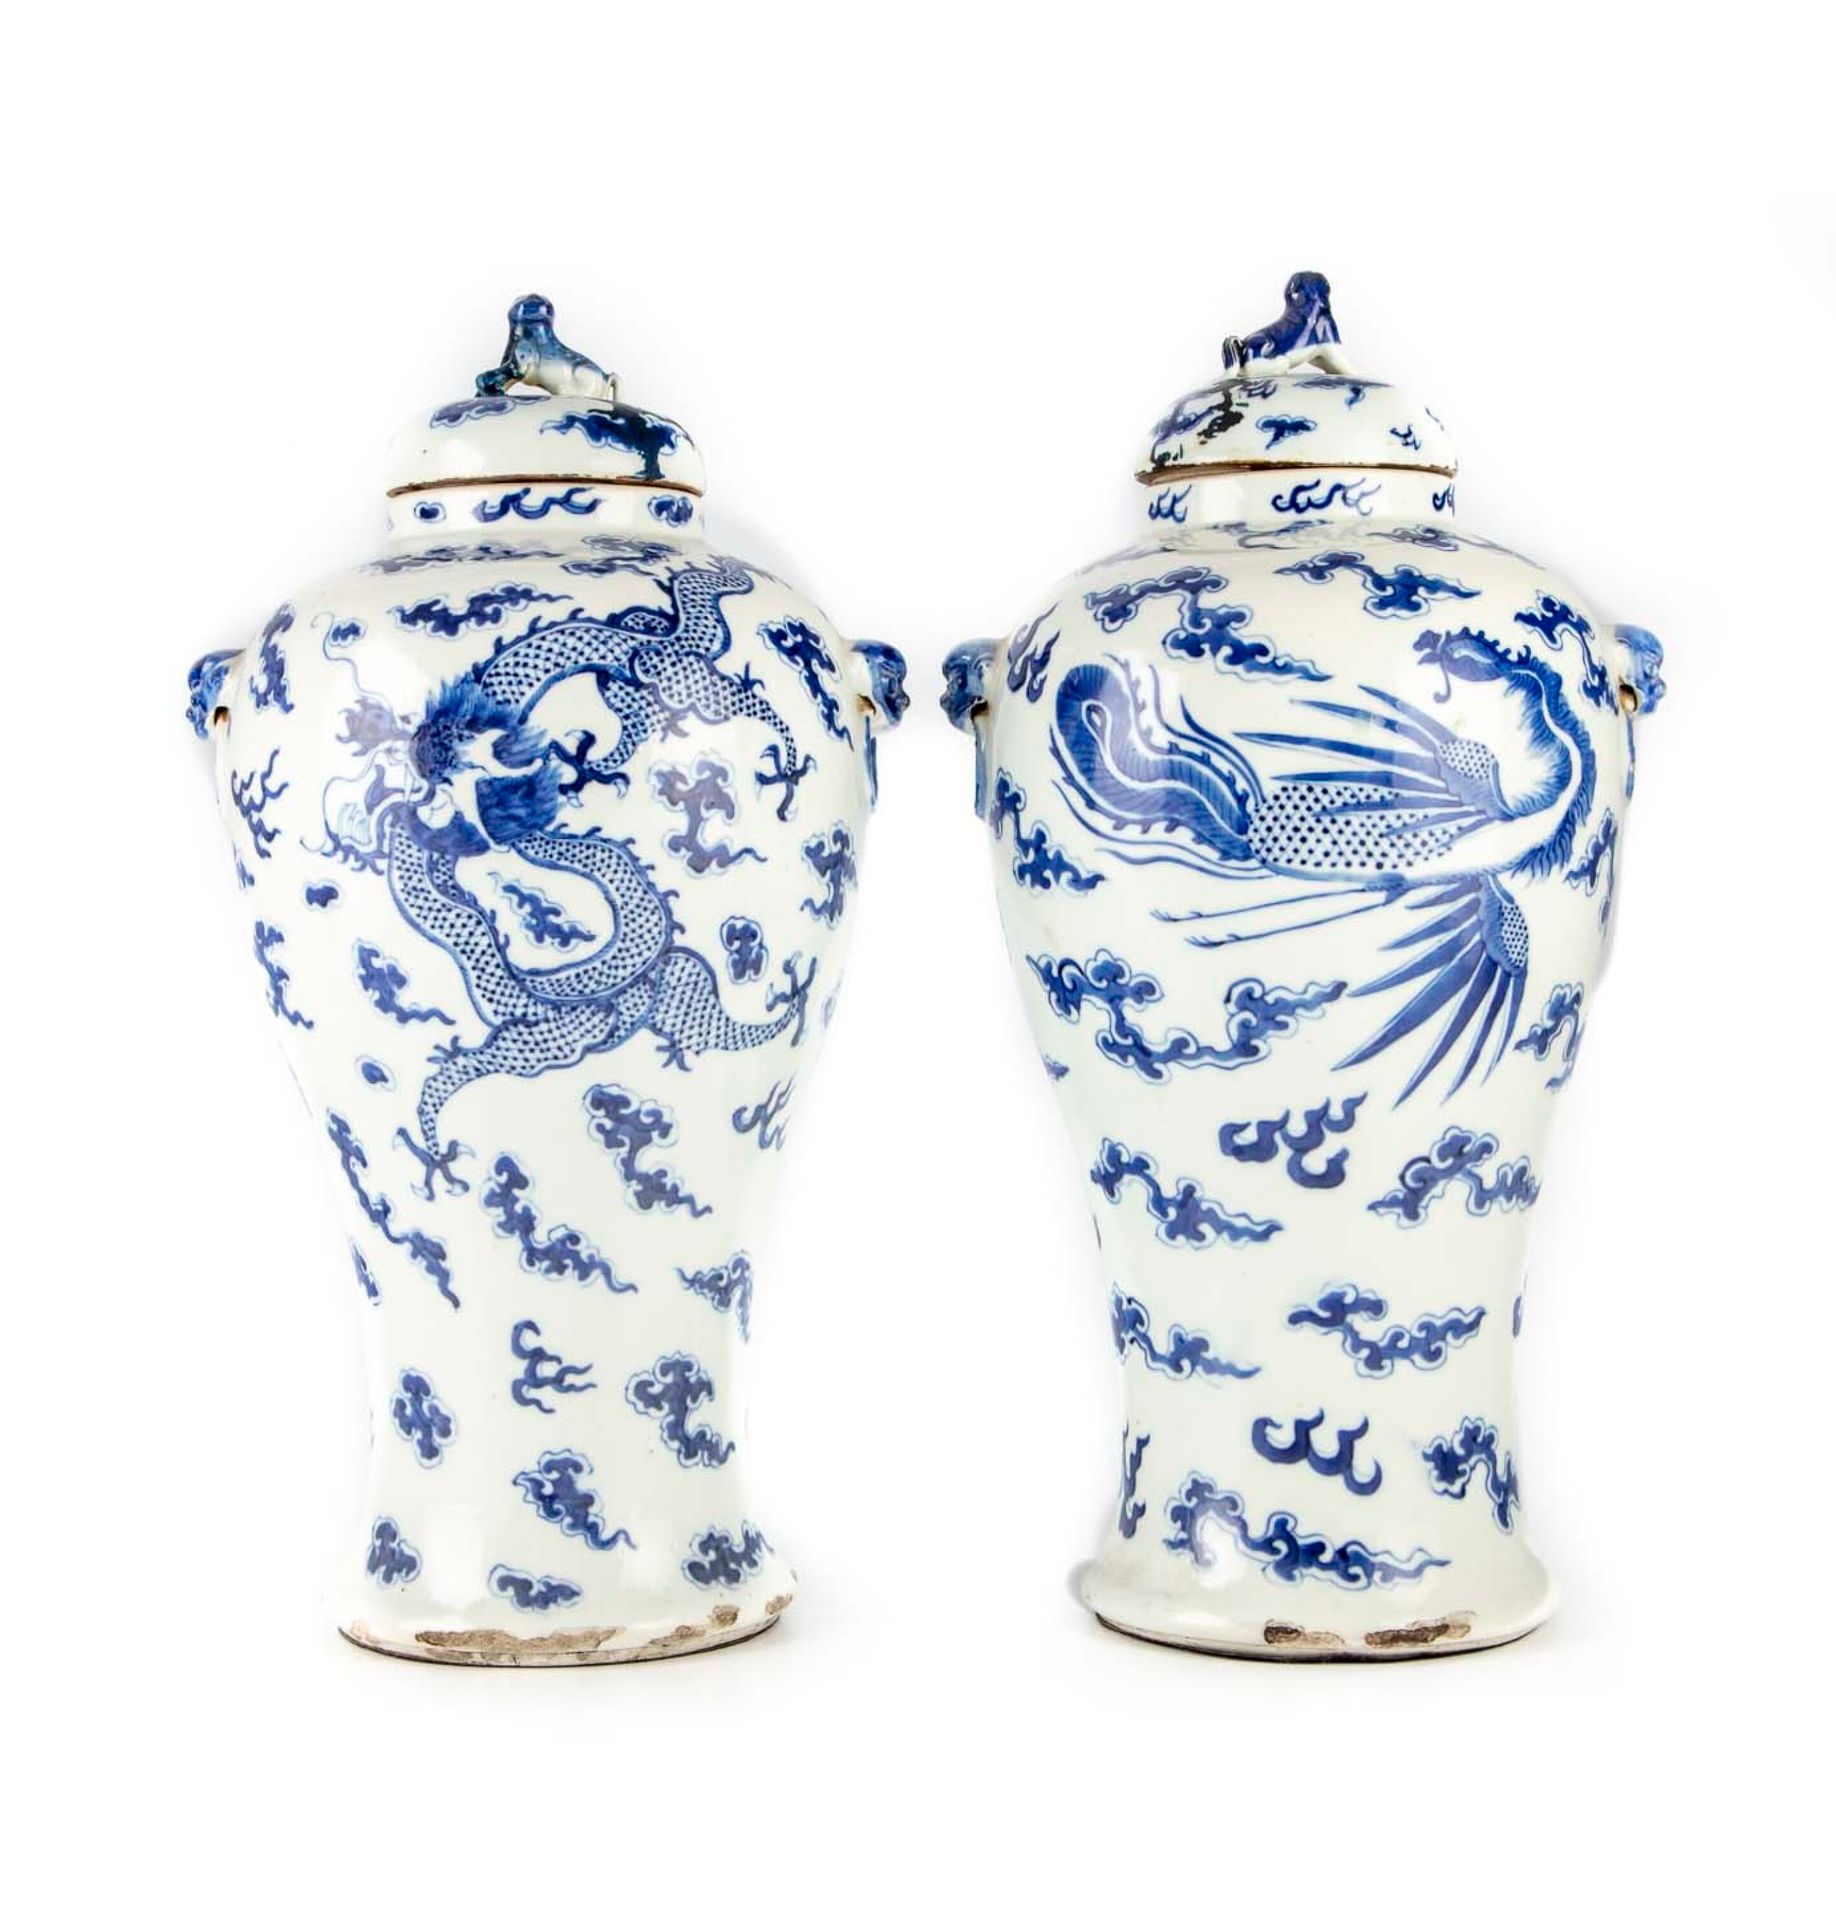 CHINE CHINA

Pair of covered porcelain vases of baluster shape with blue undergl&hellip;